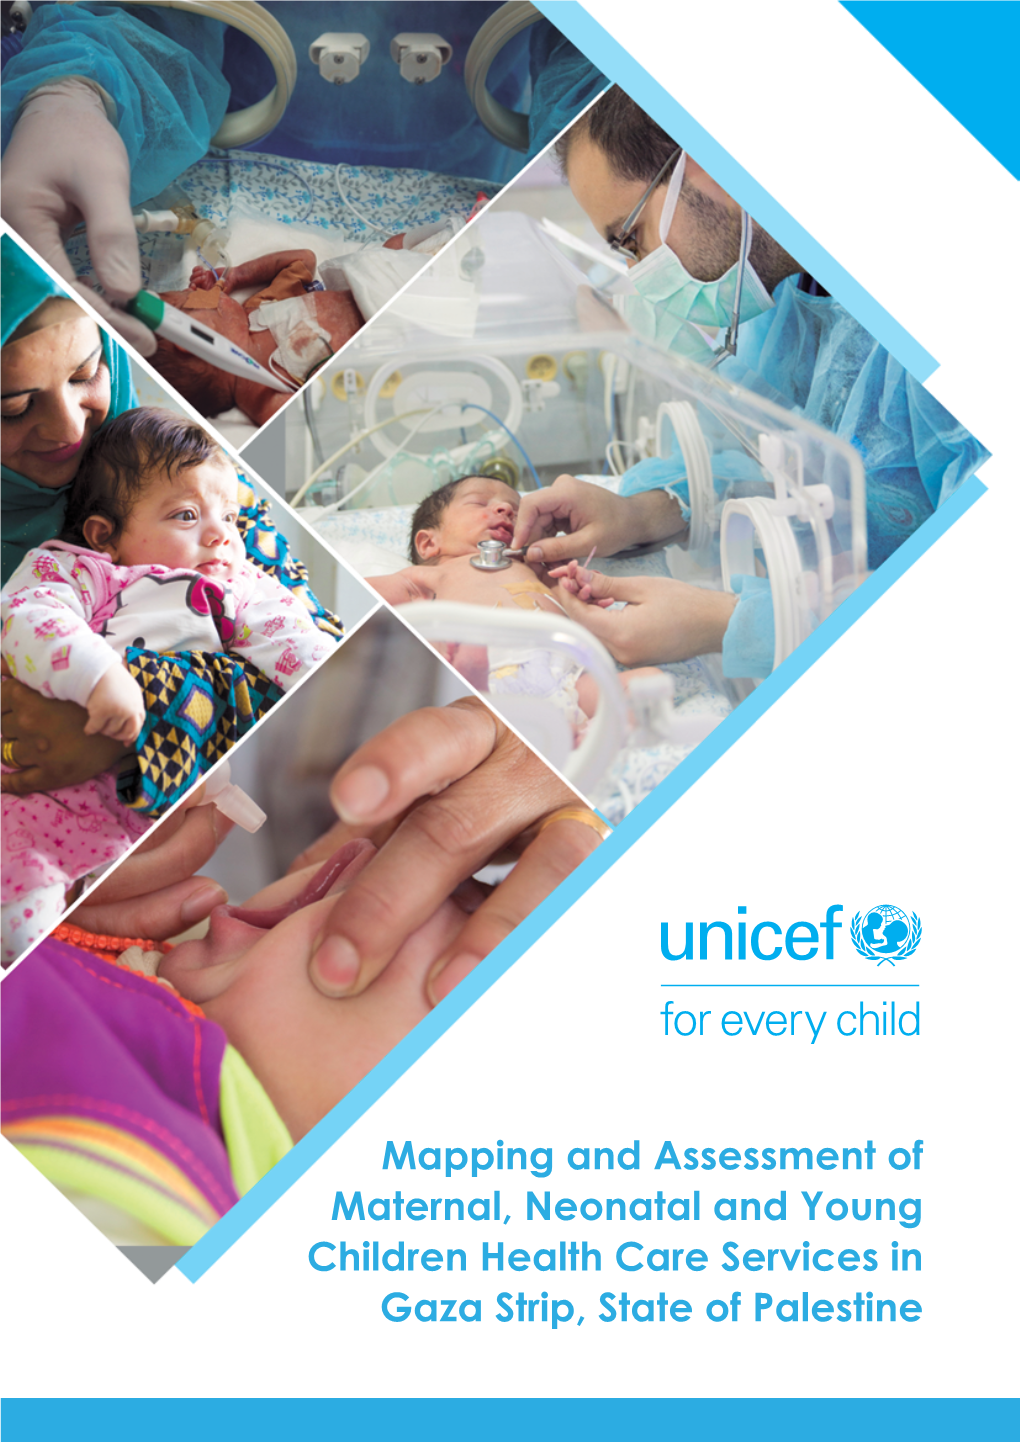 Mapping and Assessment of Maternal, Neonatal and Young Children Health Care Services in Gaza Strip, State of Palestine